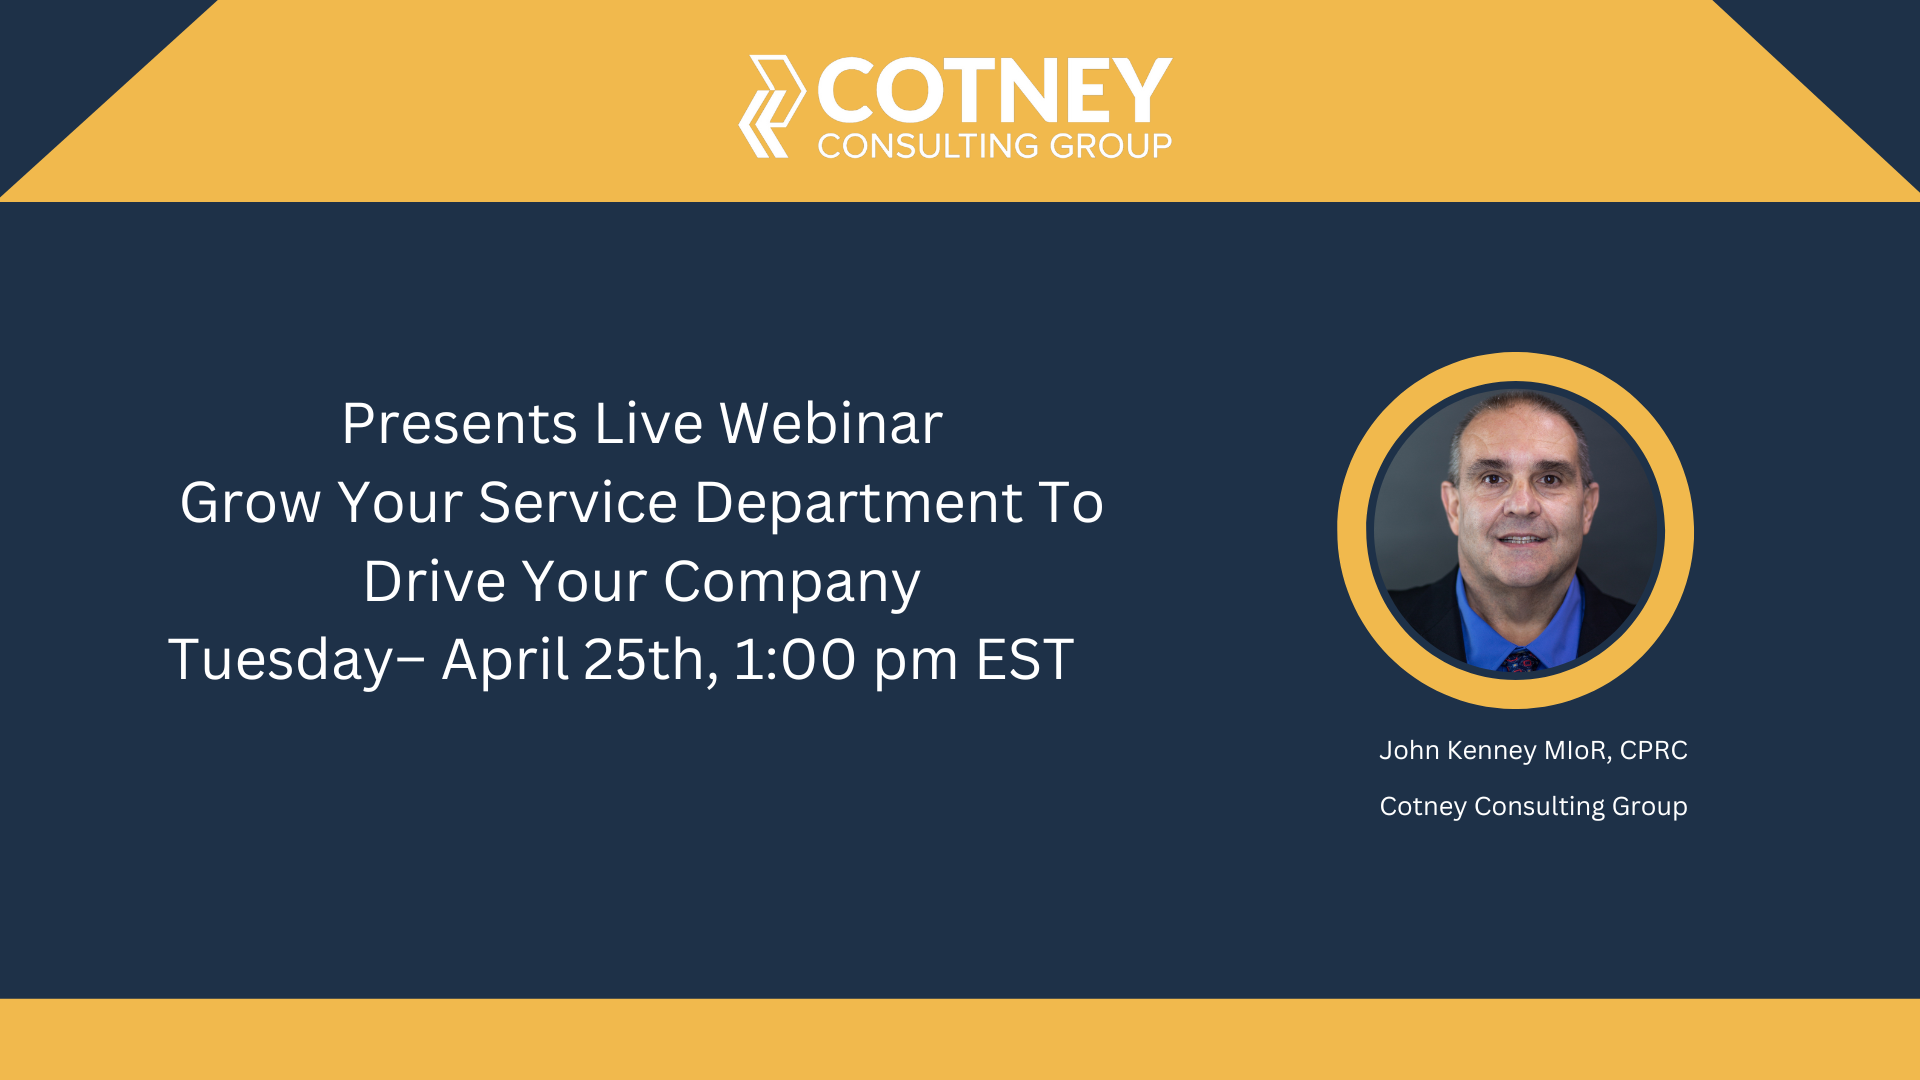 Cotney Consulting Group - Grow Your Service Department To Drive Your Company